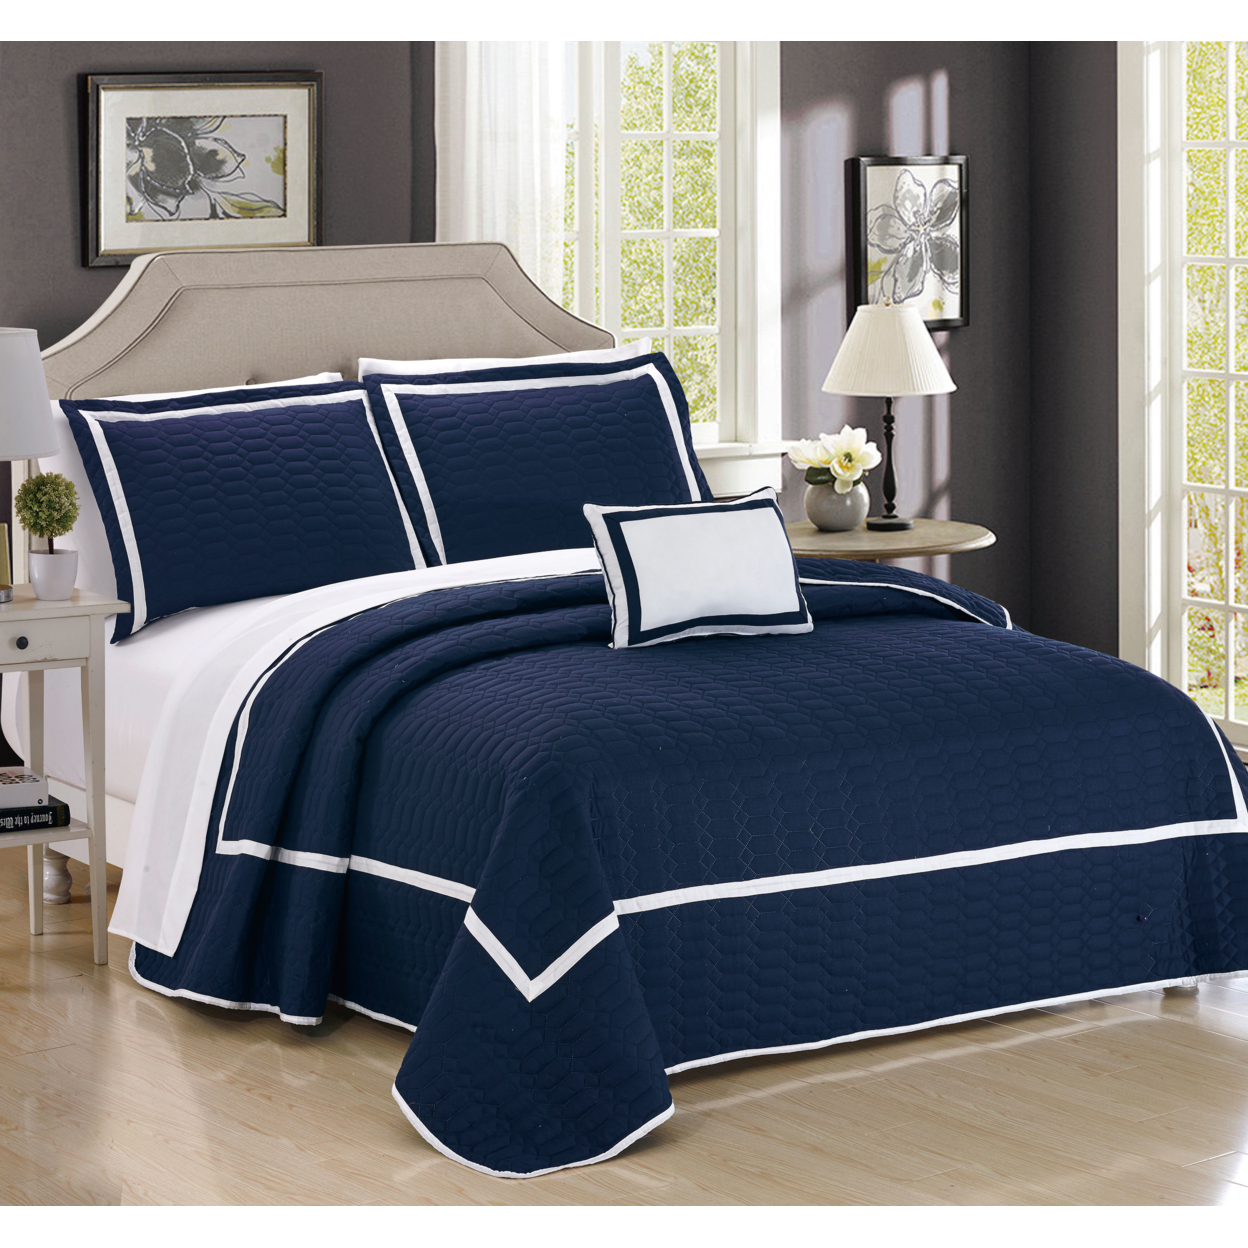 8 Pc. Neal Hotel Collection 2 Tone Banded Geometrical Embroidered, Quilt In A Bag, Includes Sheets Set, Shams & Decorative Pillows - Navy, K